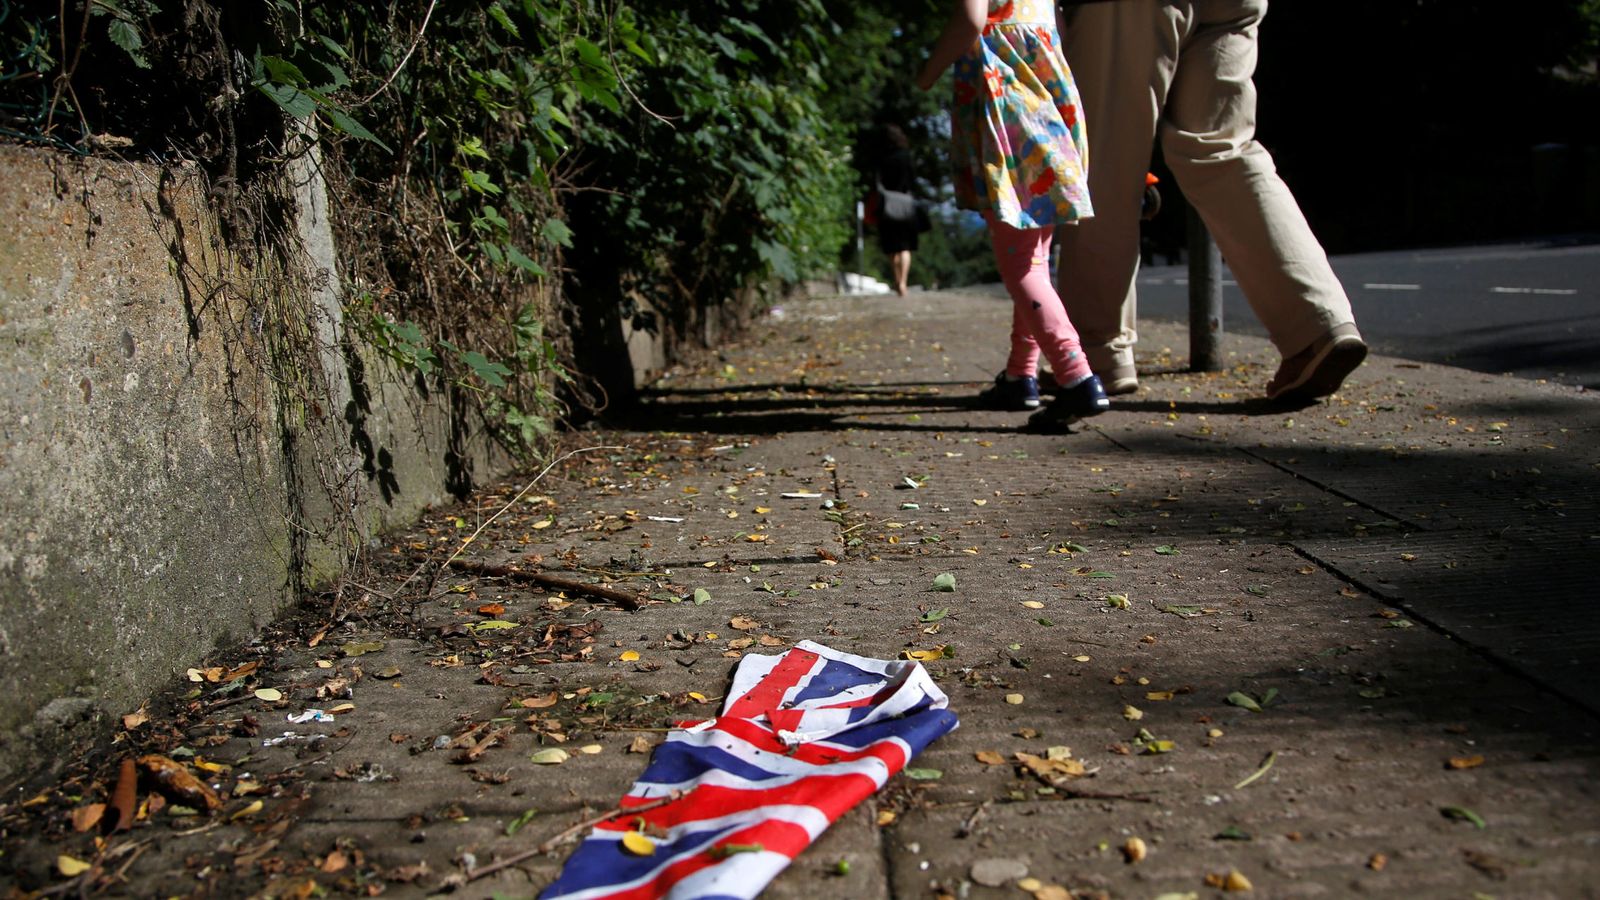 Foto: A british flag which was washed away by heavy rains the day before lies on the street in london